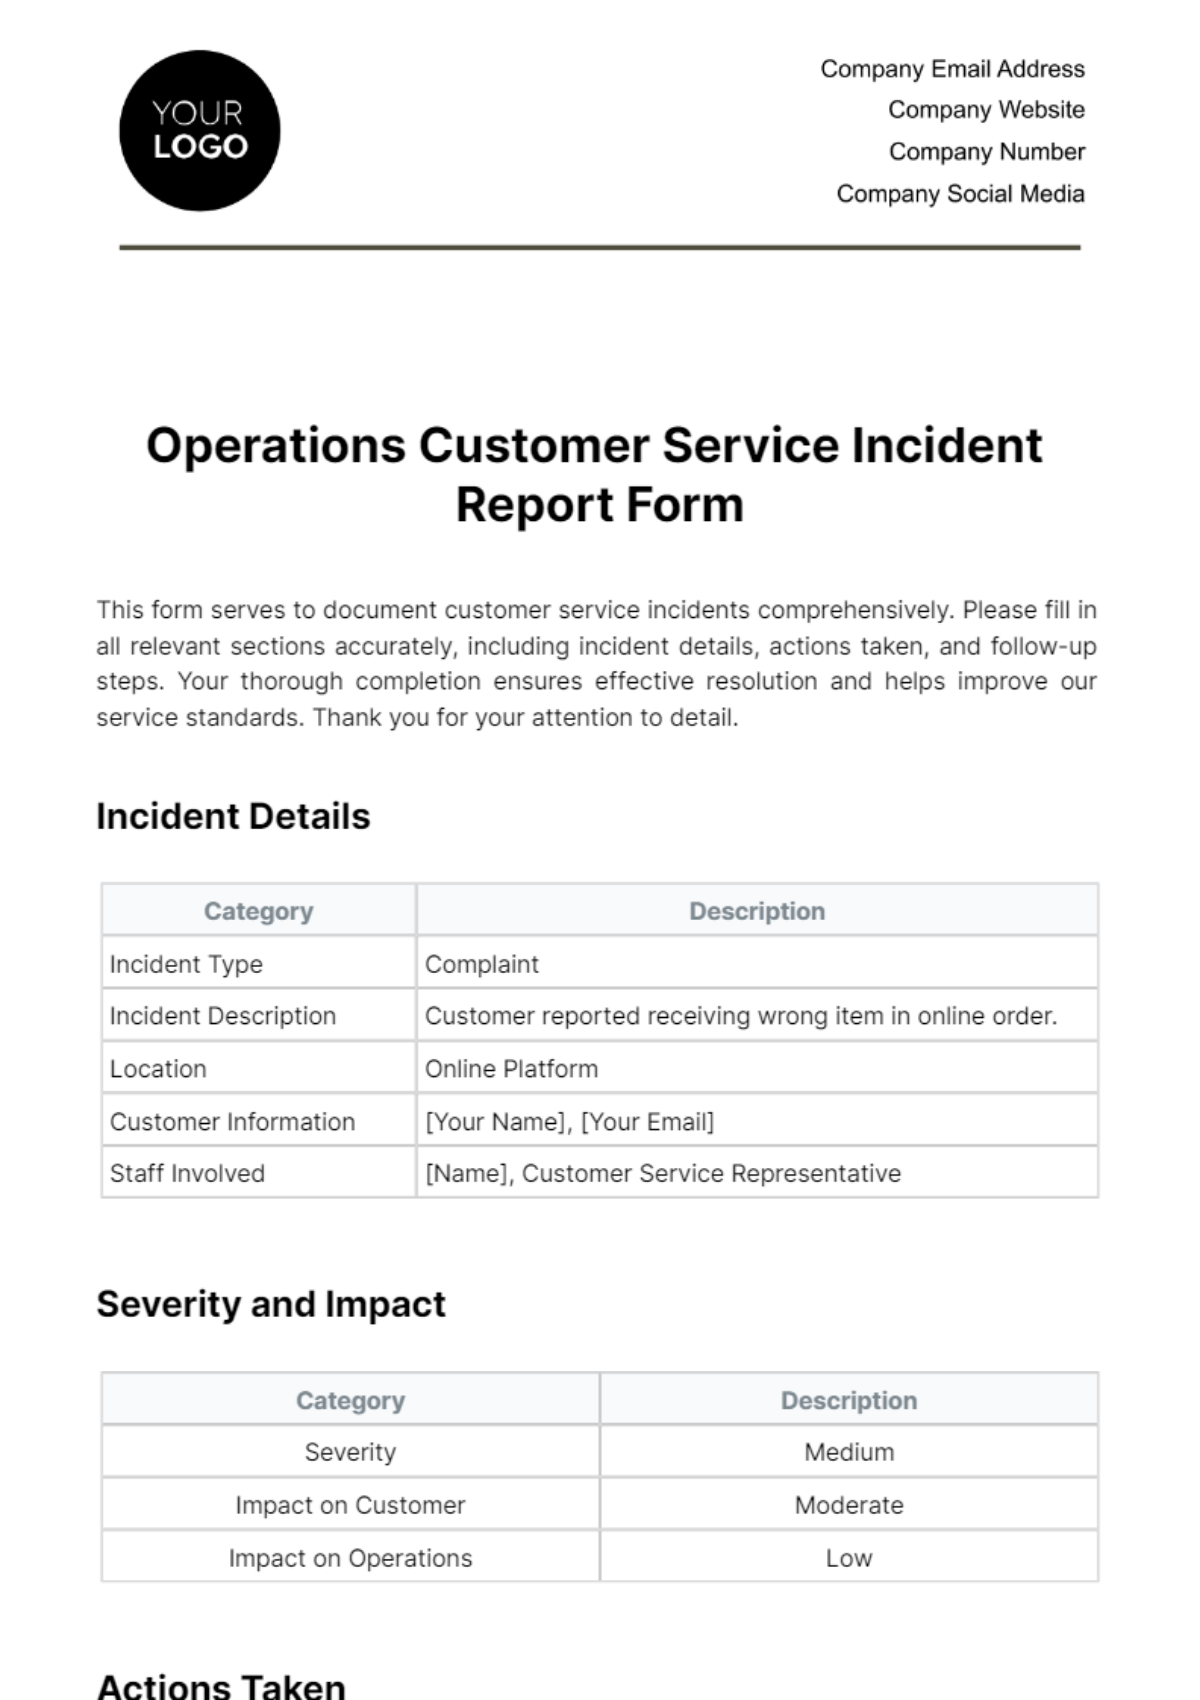 Free Operations Customer Service Incident Report Form Template